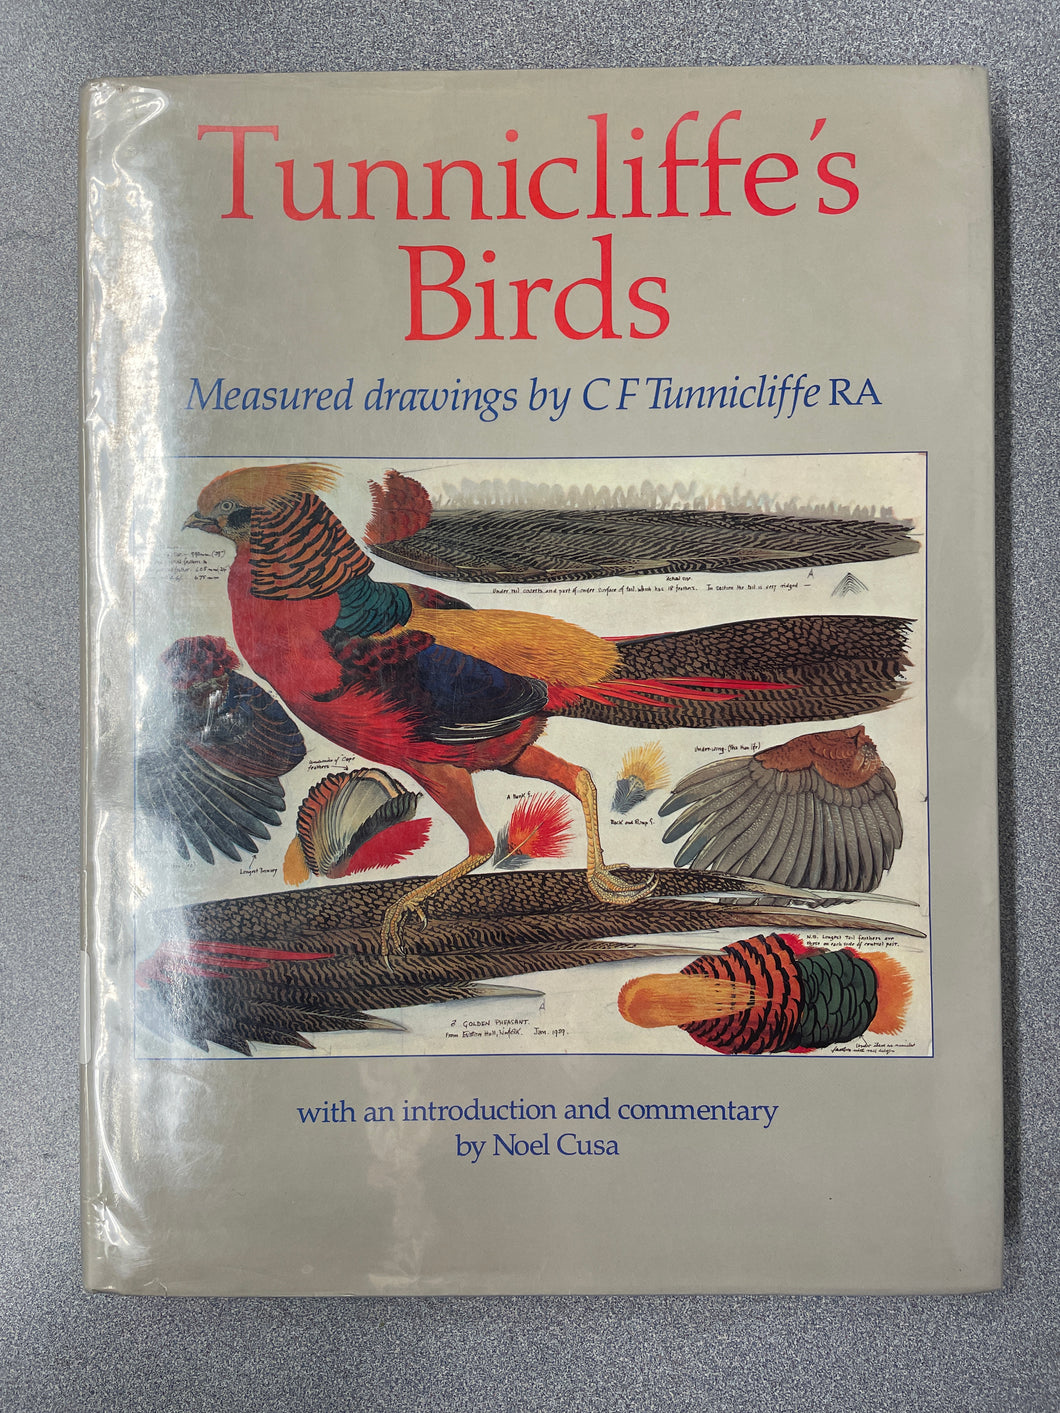 Tunnicliffe's Birds: Measured Drawings by C. F. Tunnicliffe RA, Tunnicliffe, C. F.[1984] A 5/24